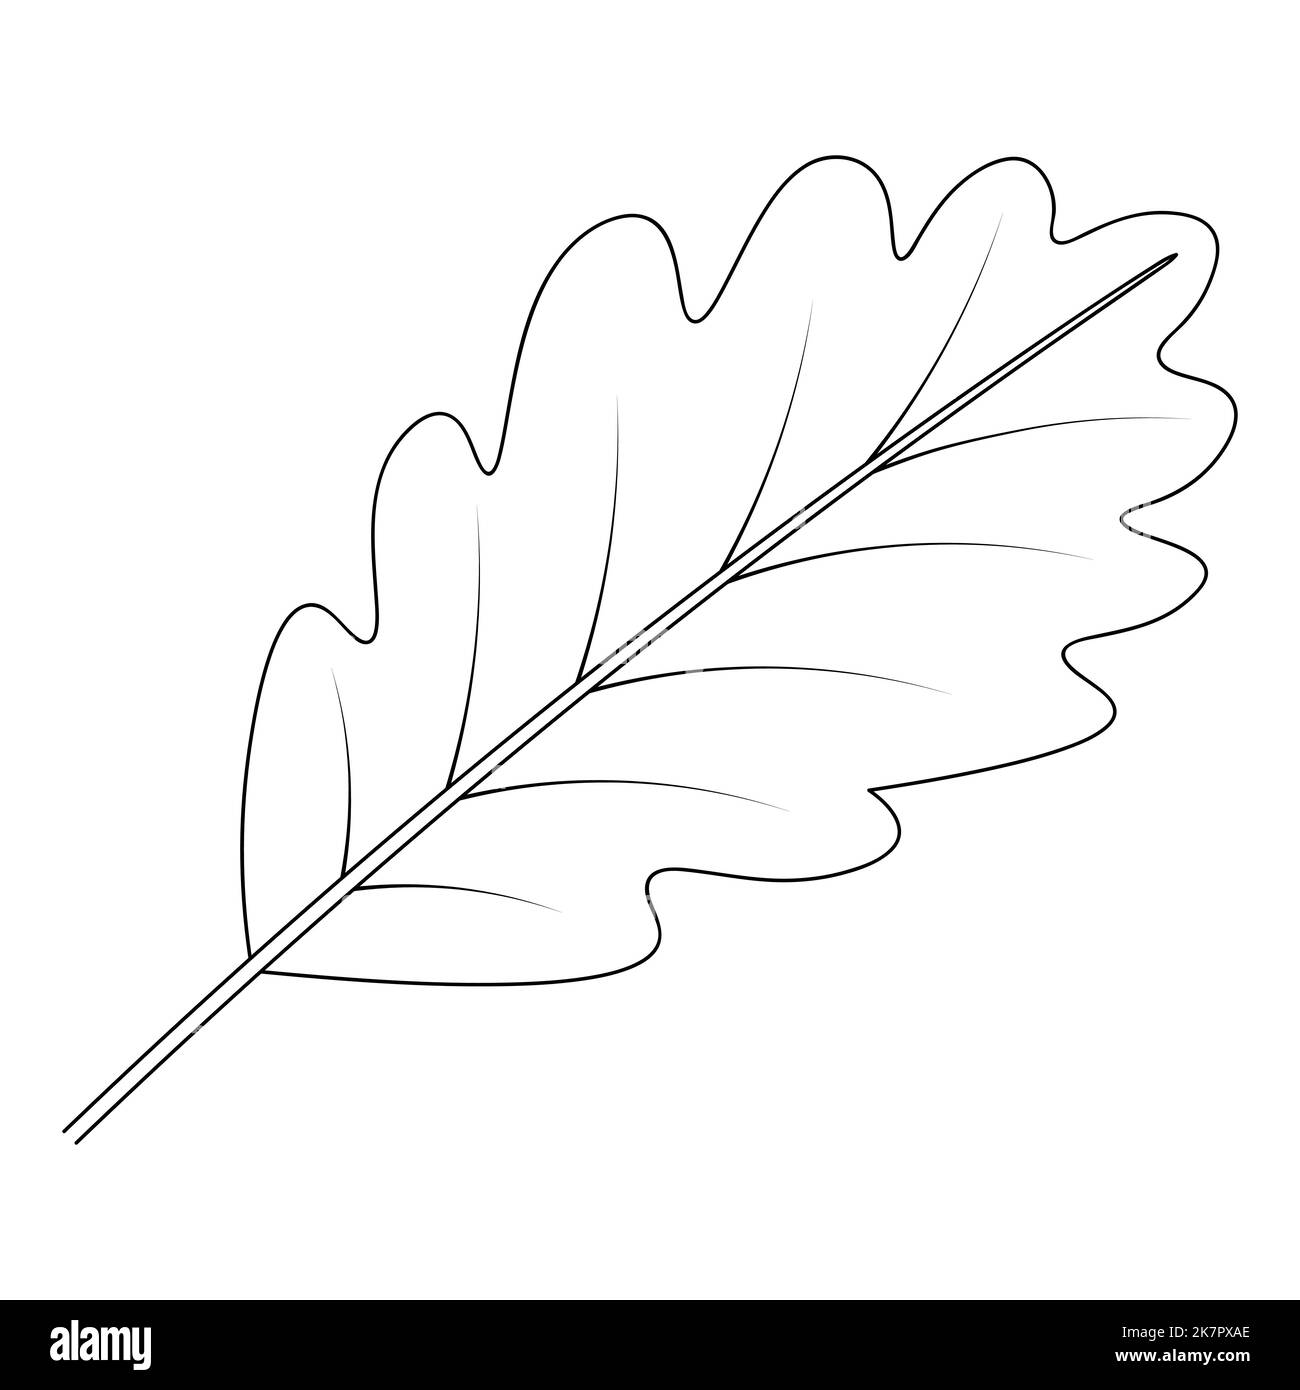 Oak Leaf. Part of the tree with veins. Vector illustration. Outline on an isolated white background. Doodle style. Sketch. Coloring book Stock Vector